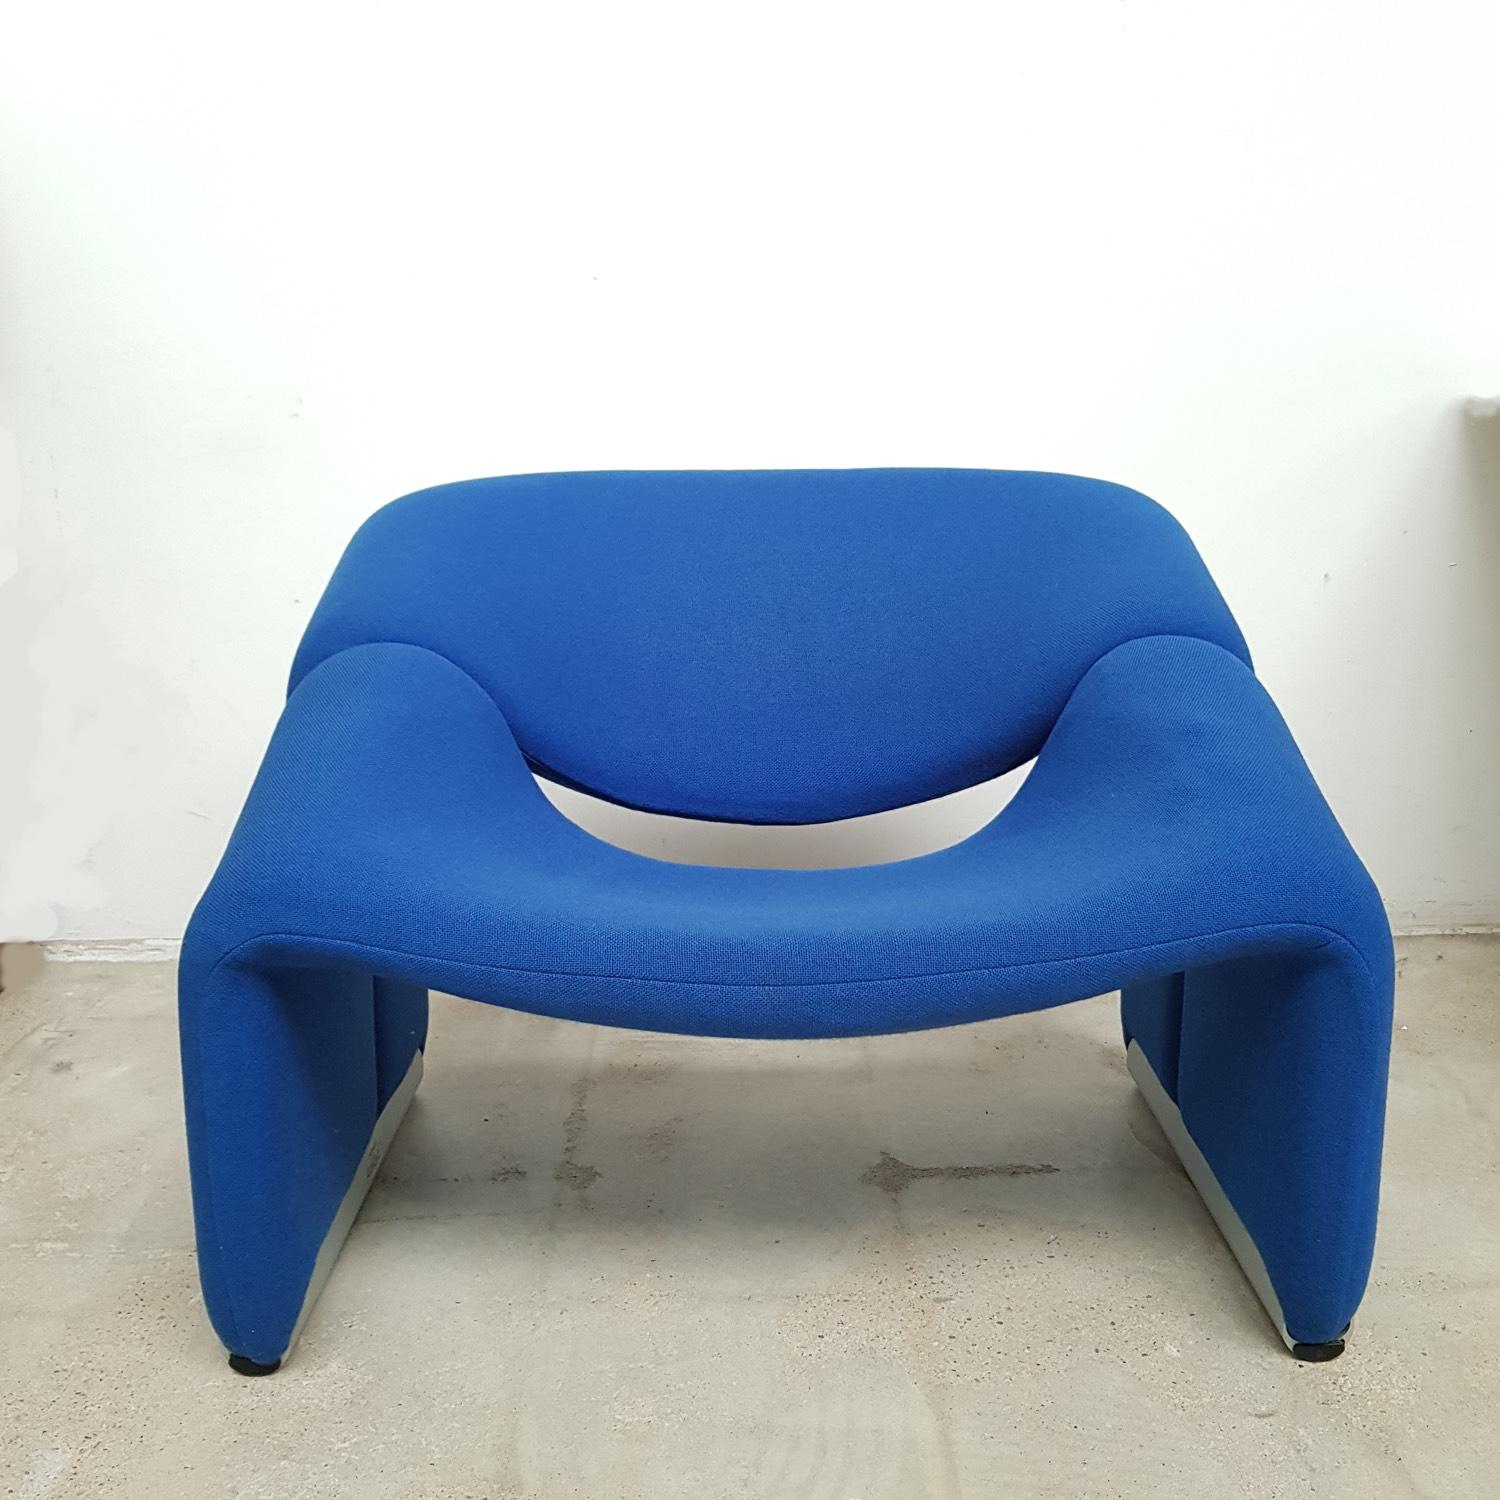 Wool upholstering in original ‘Tonus’ fabric. The groovy chair – or F598 – was designed in 1973 by France’s top designer Pierre Paulin for Holland’s most avant-garde furniture maker Artifort. Their compactness combined with great comfort and of